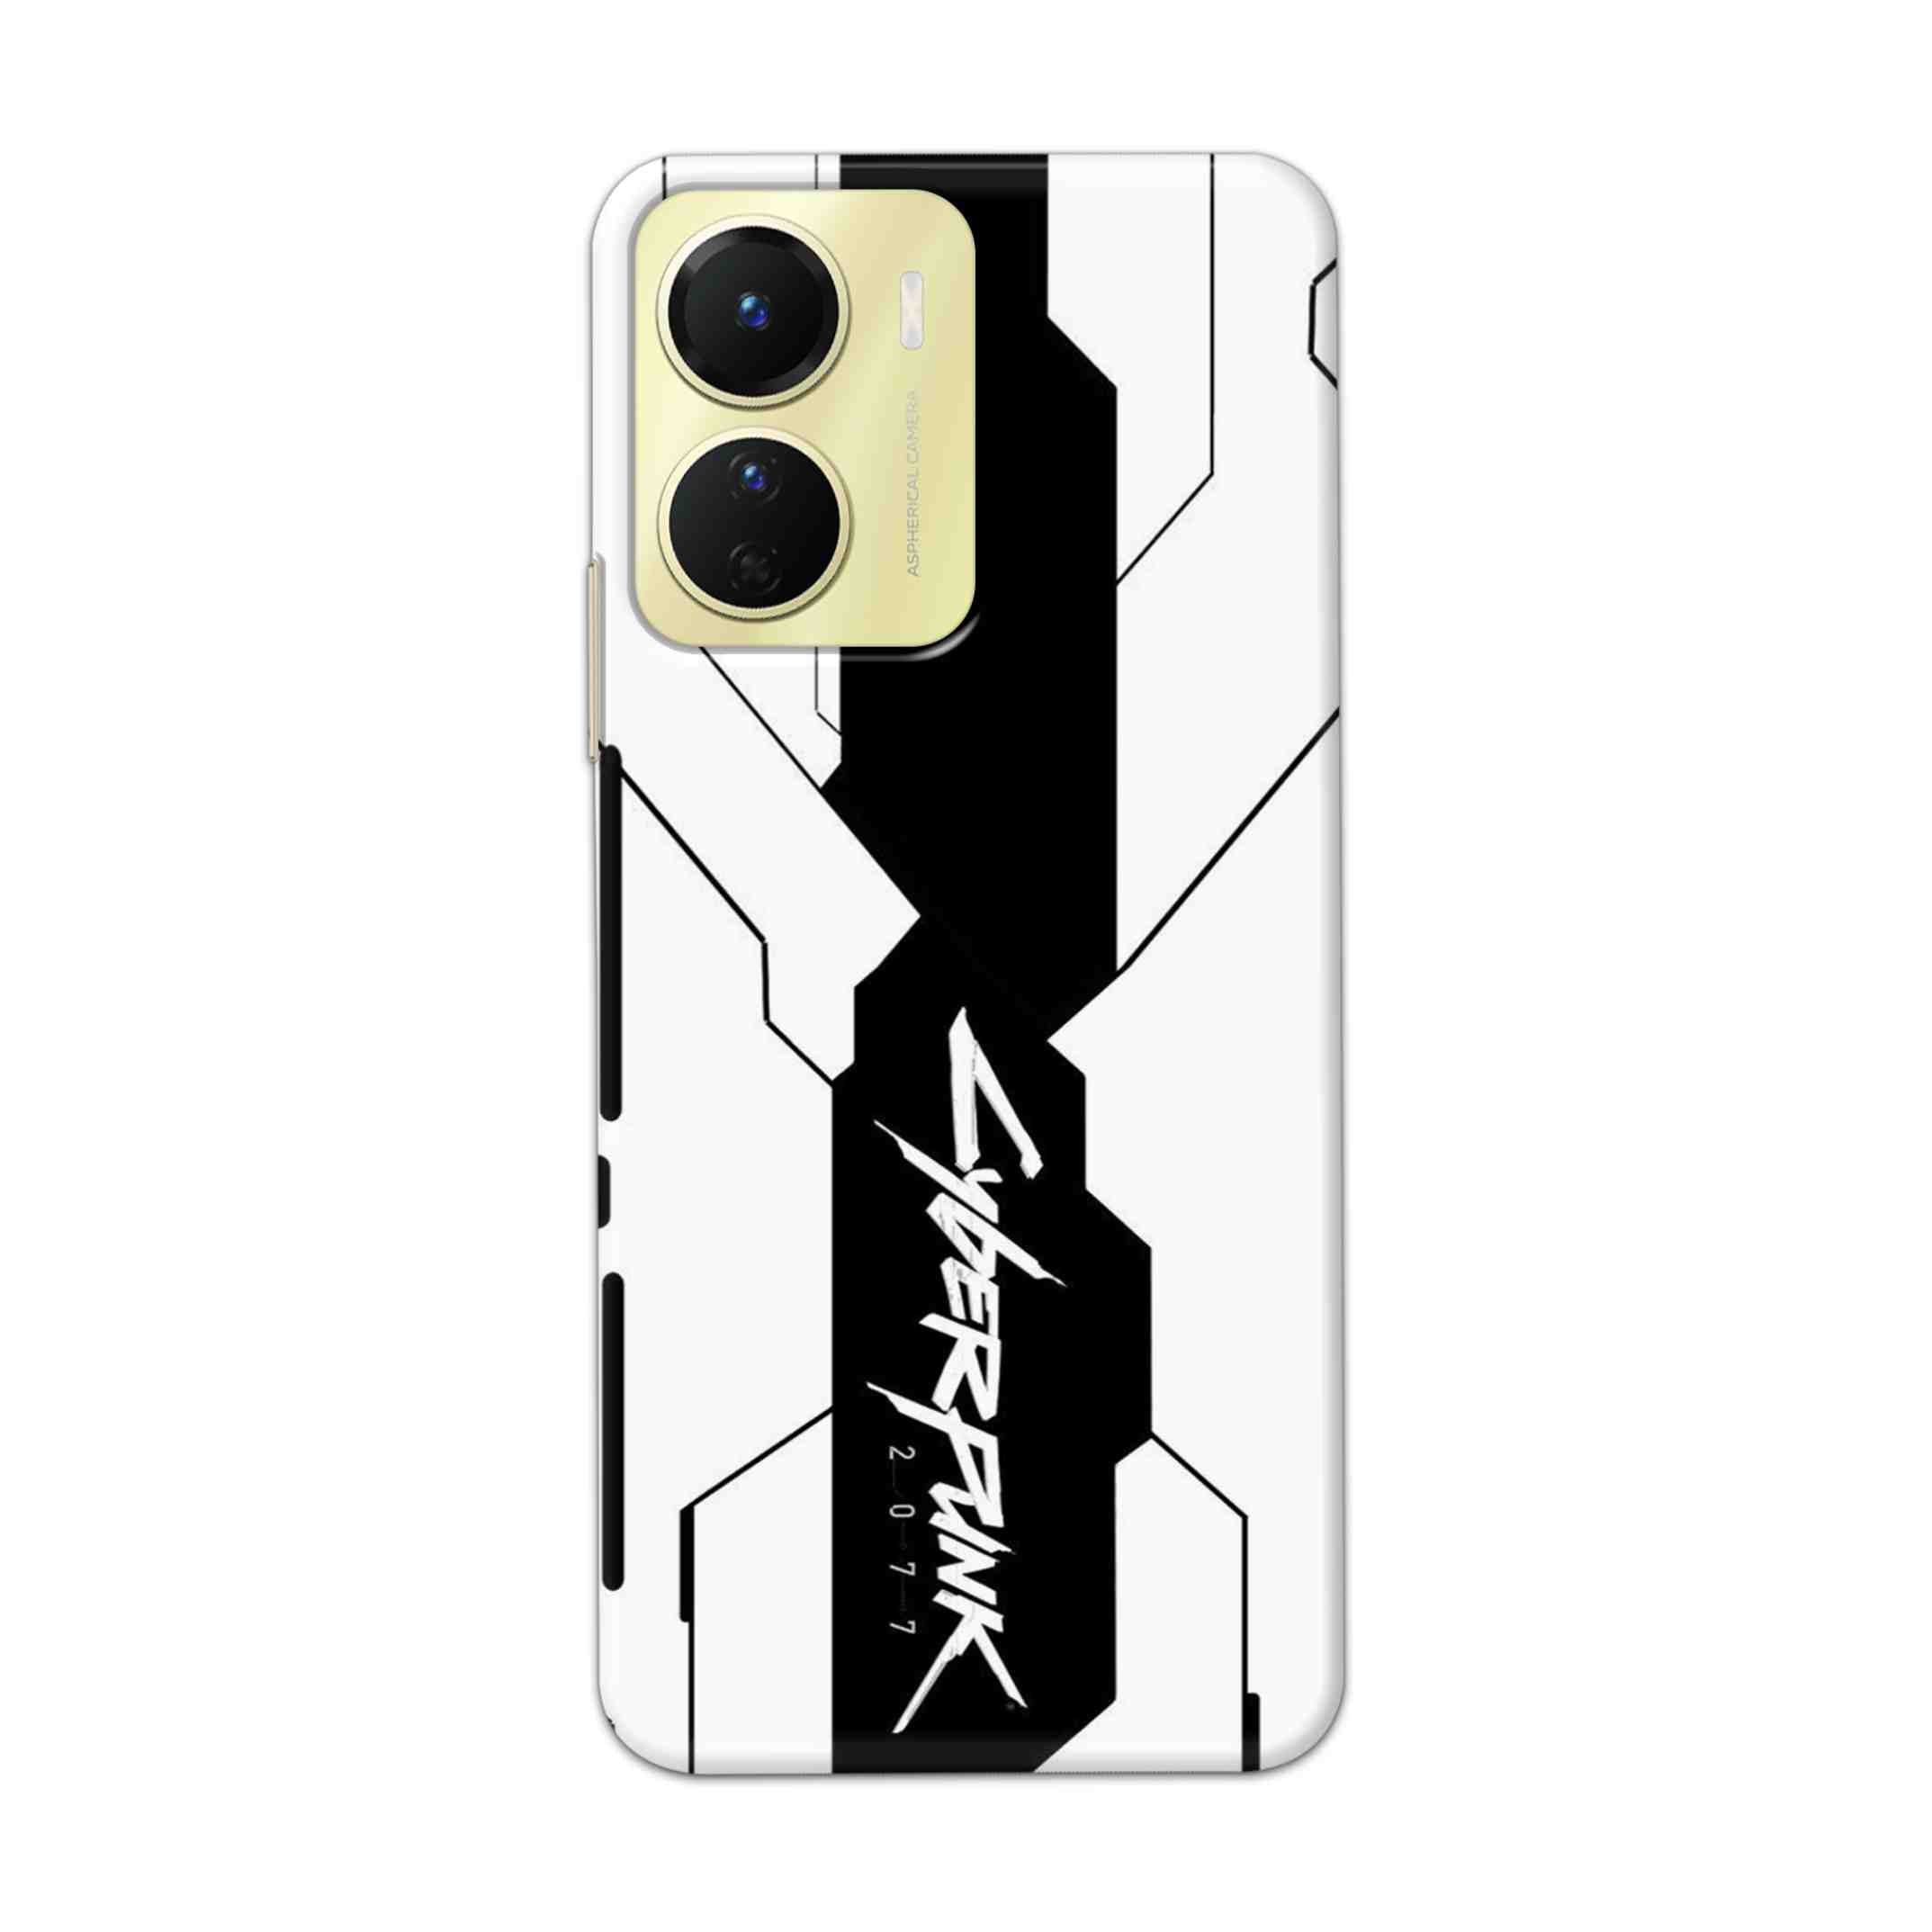 Buy Cyberpunk 2077 Hard Back Mobile Phone Case Cover For Vivo Y16 Online